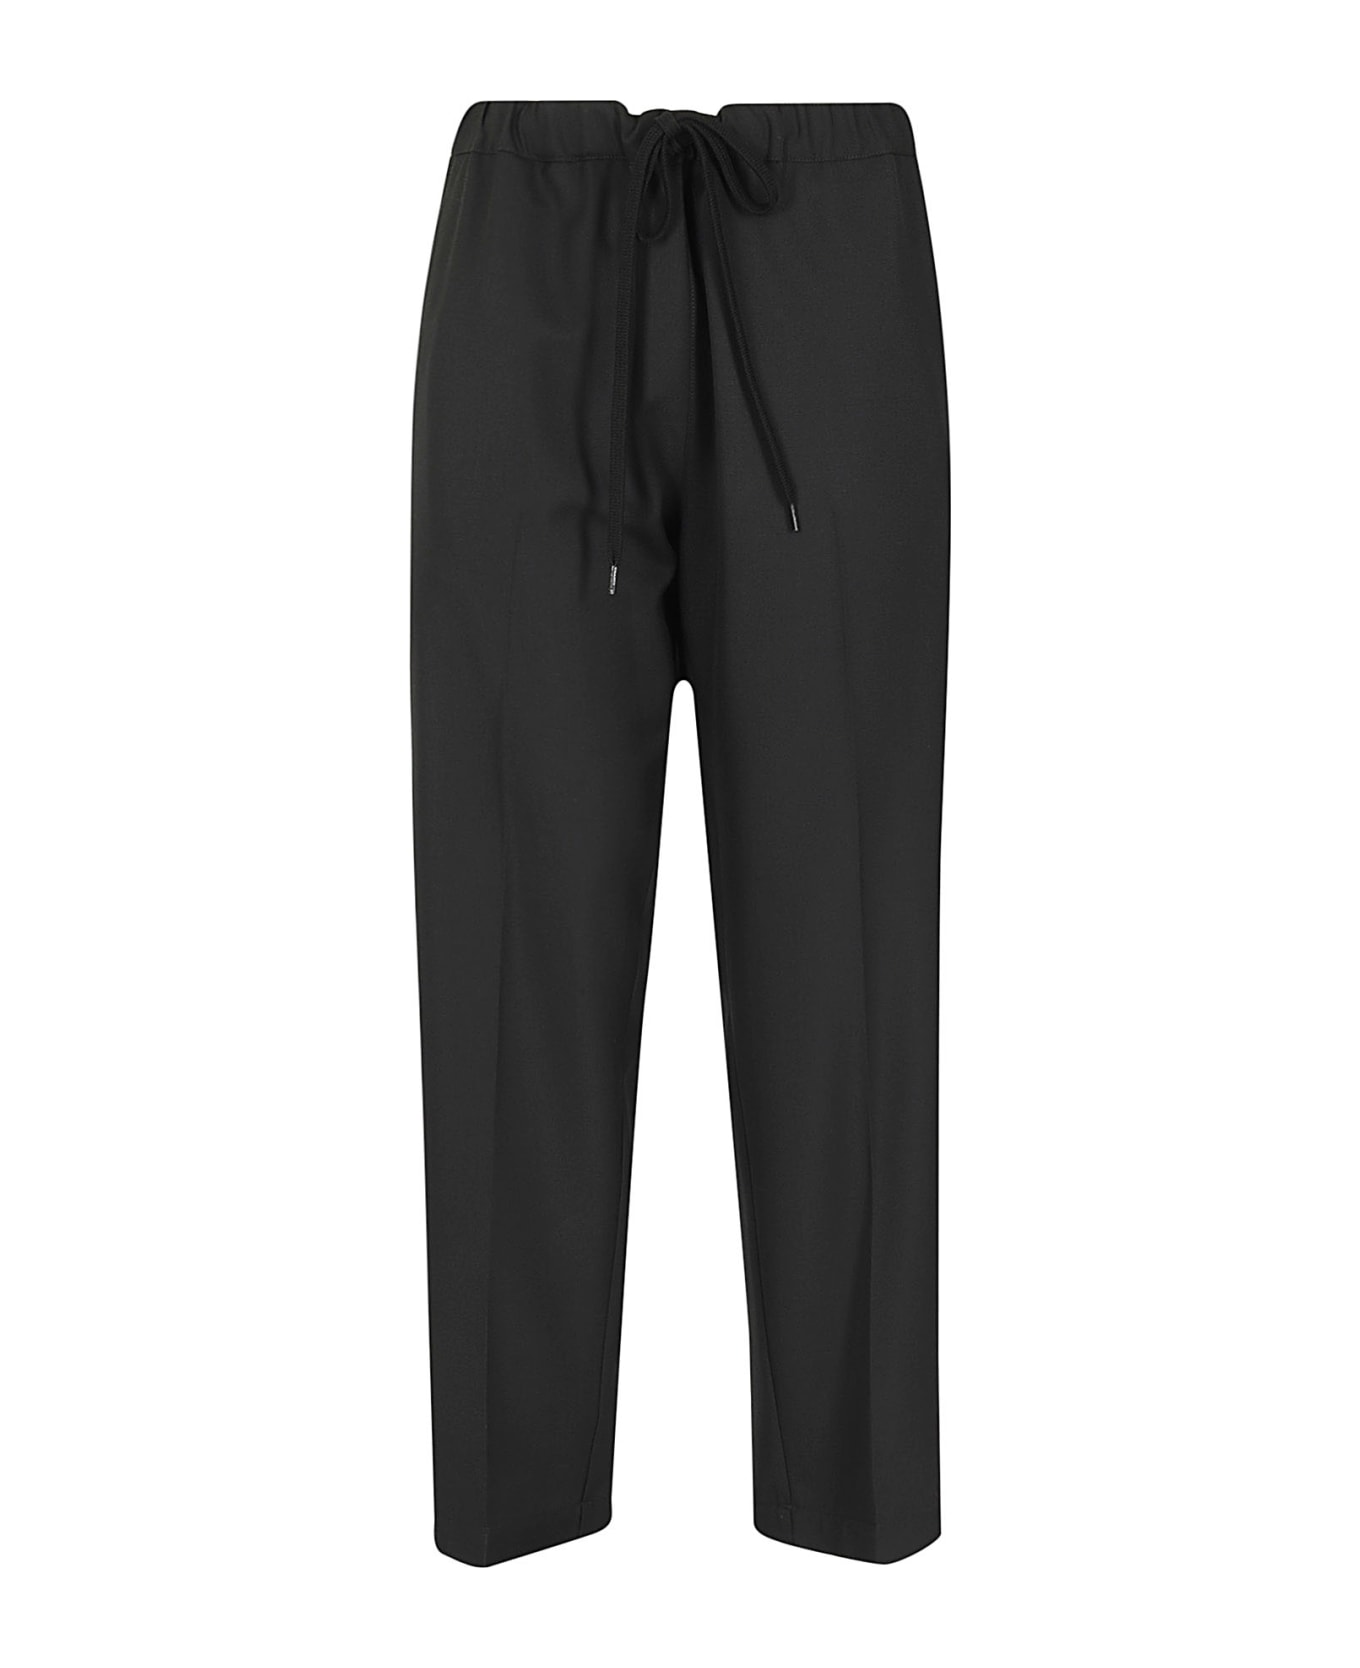 MM6 Maison Margiela Tapered Tailored Trousers - Black